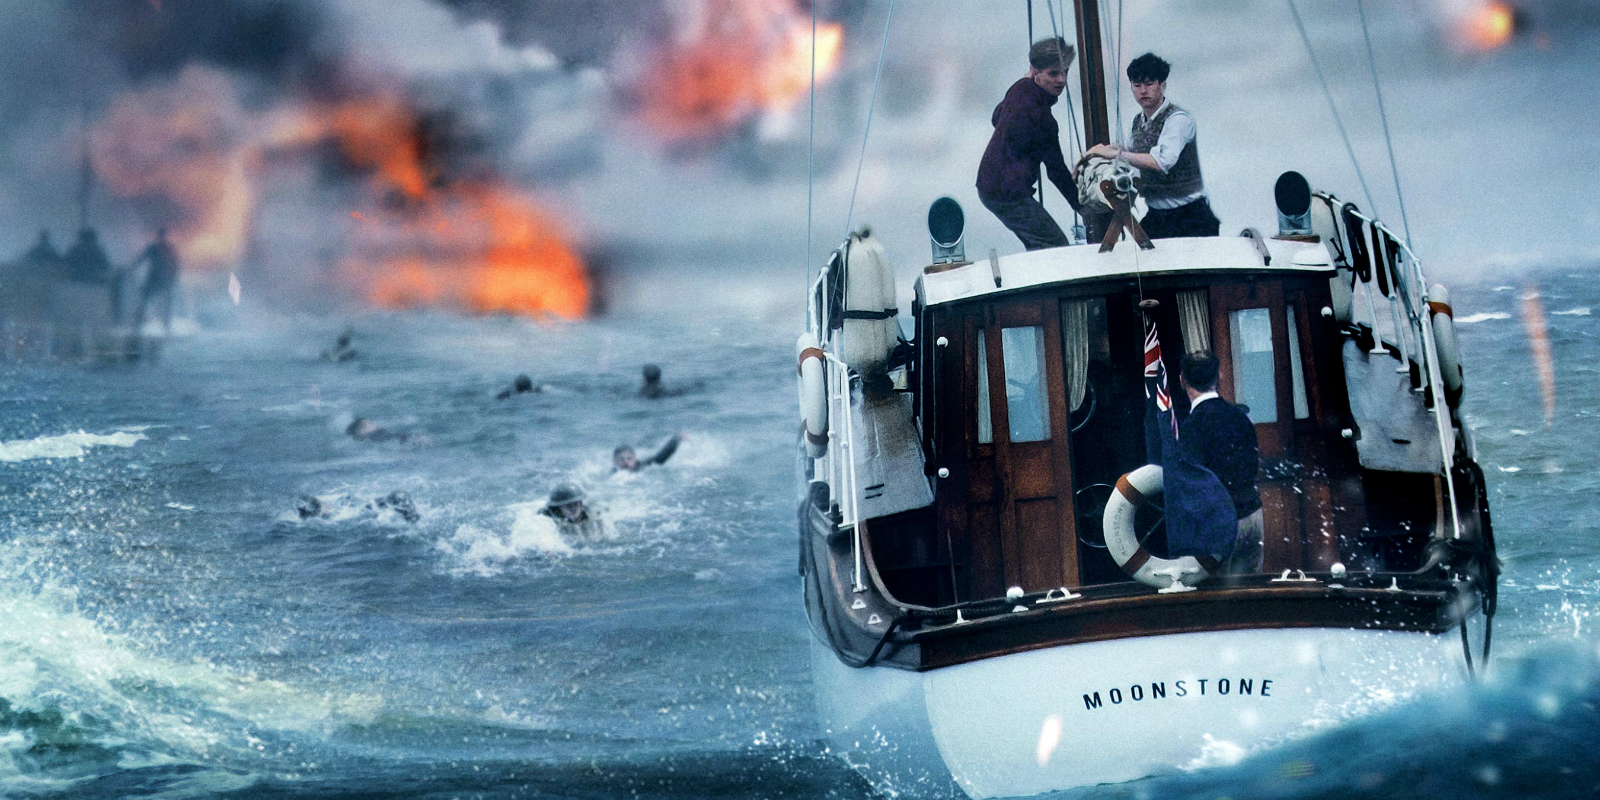 christopher-nolans-dunkirk-imax-poster-cropped.jpg